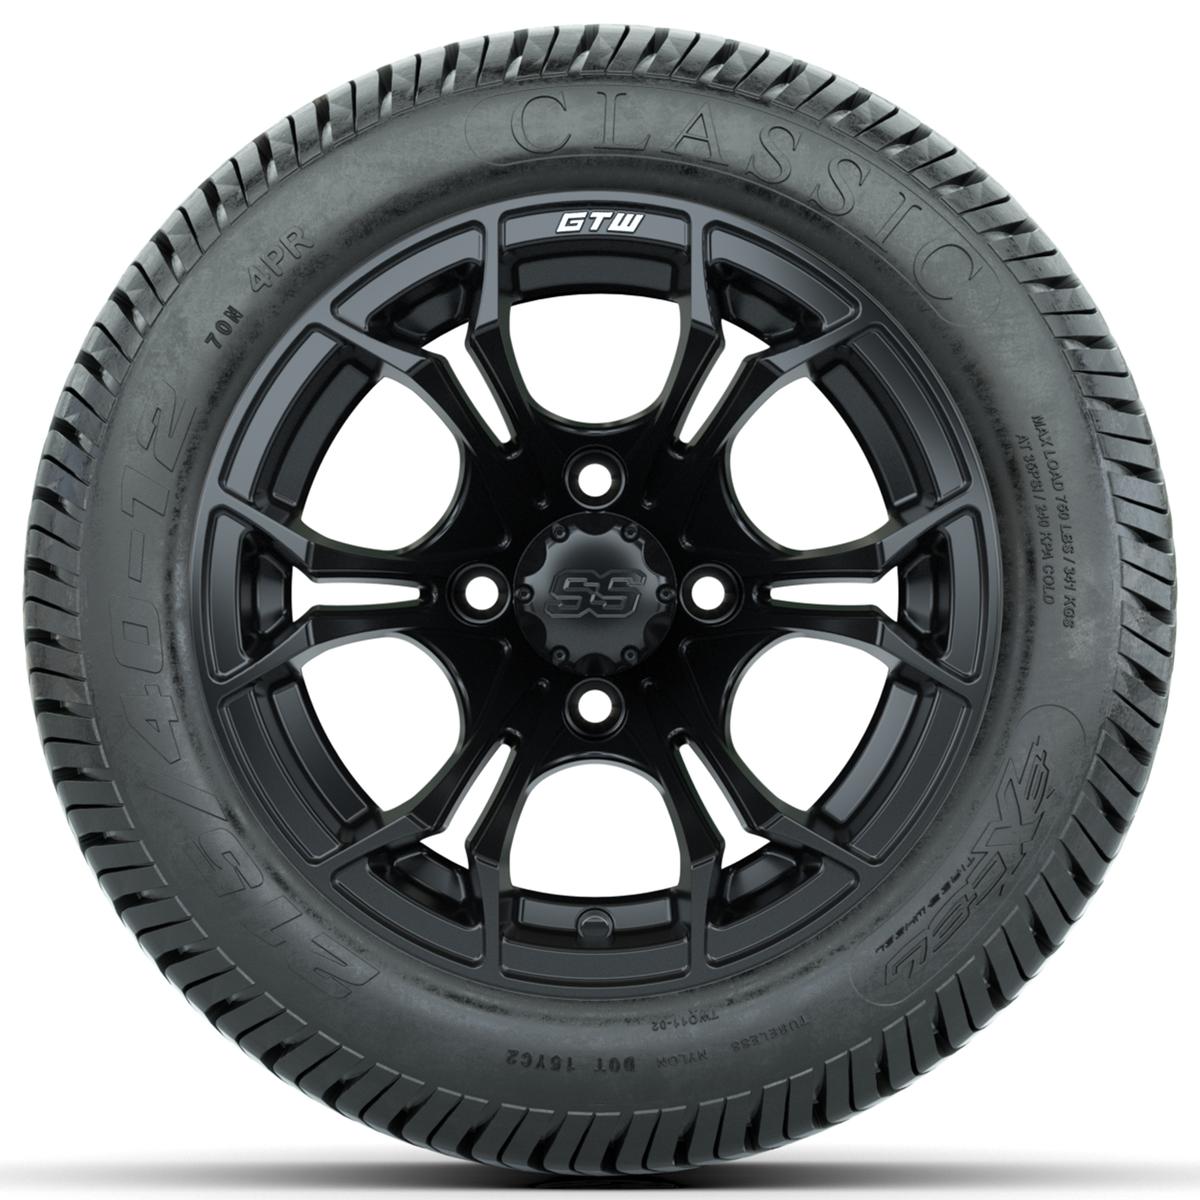 GTW Spyder Matte Black 12 in Wheels with 215/40-12 Excel Classic Street Tires – Full Set